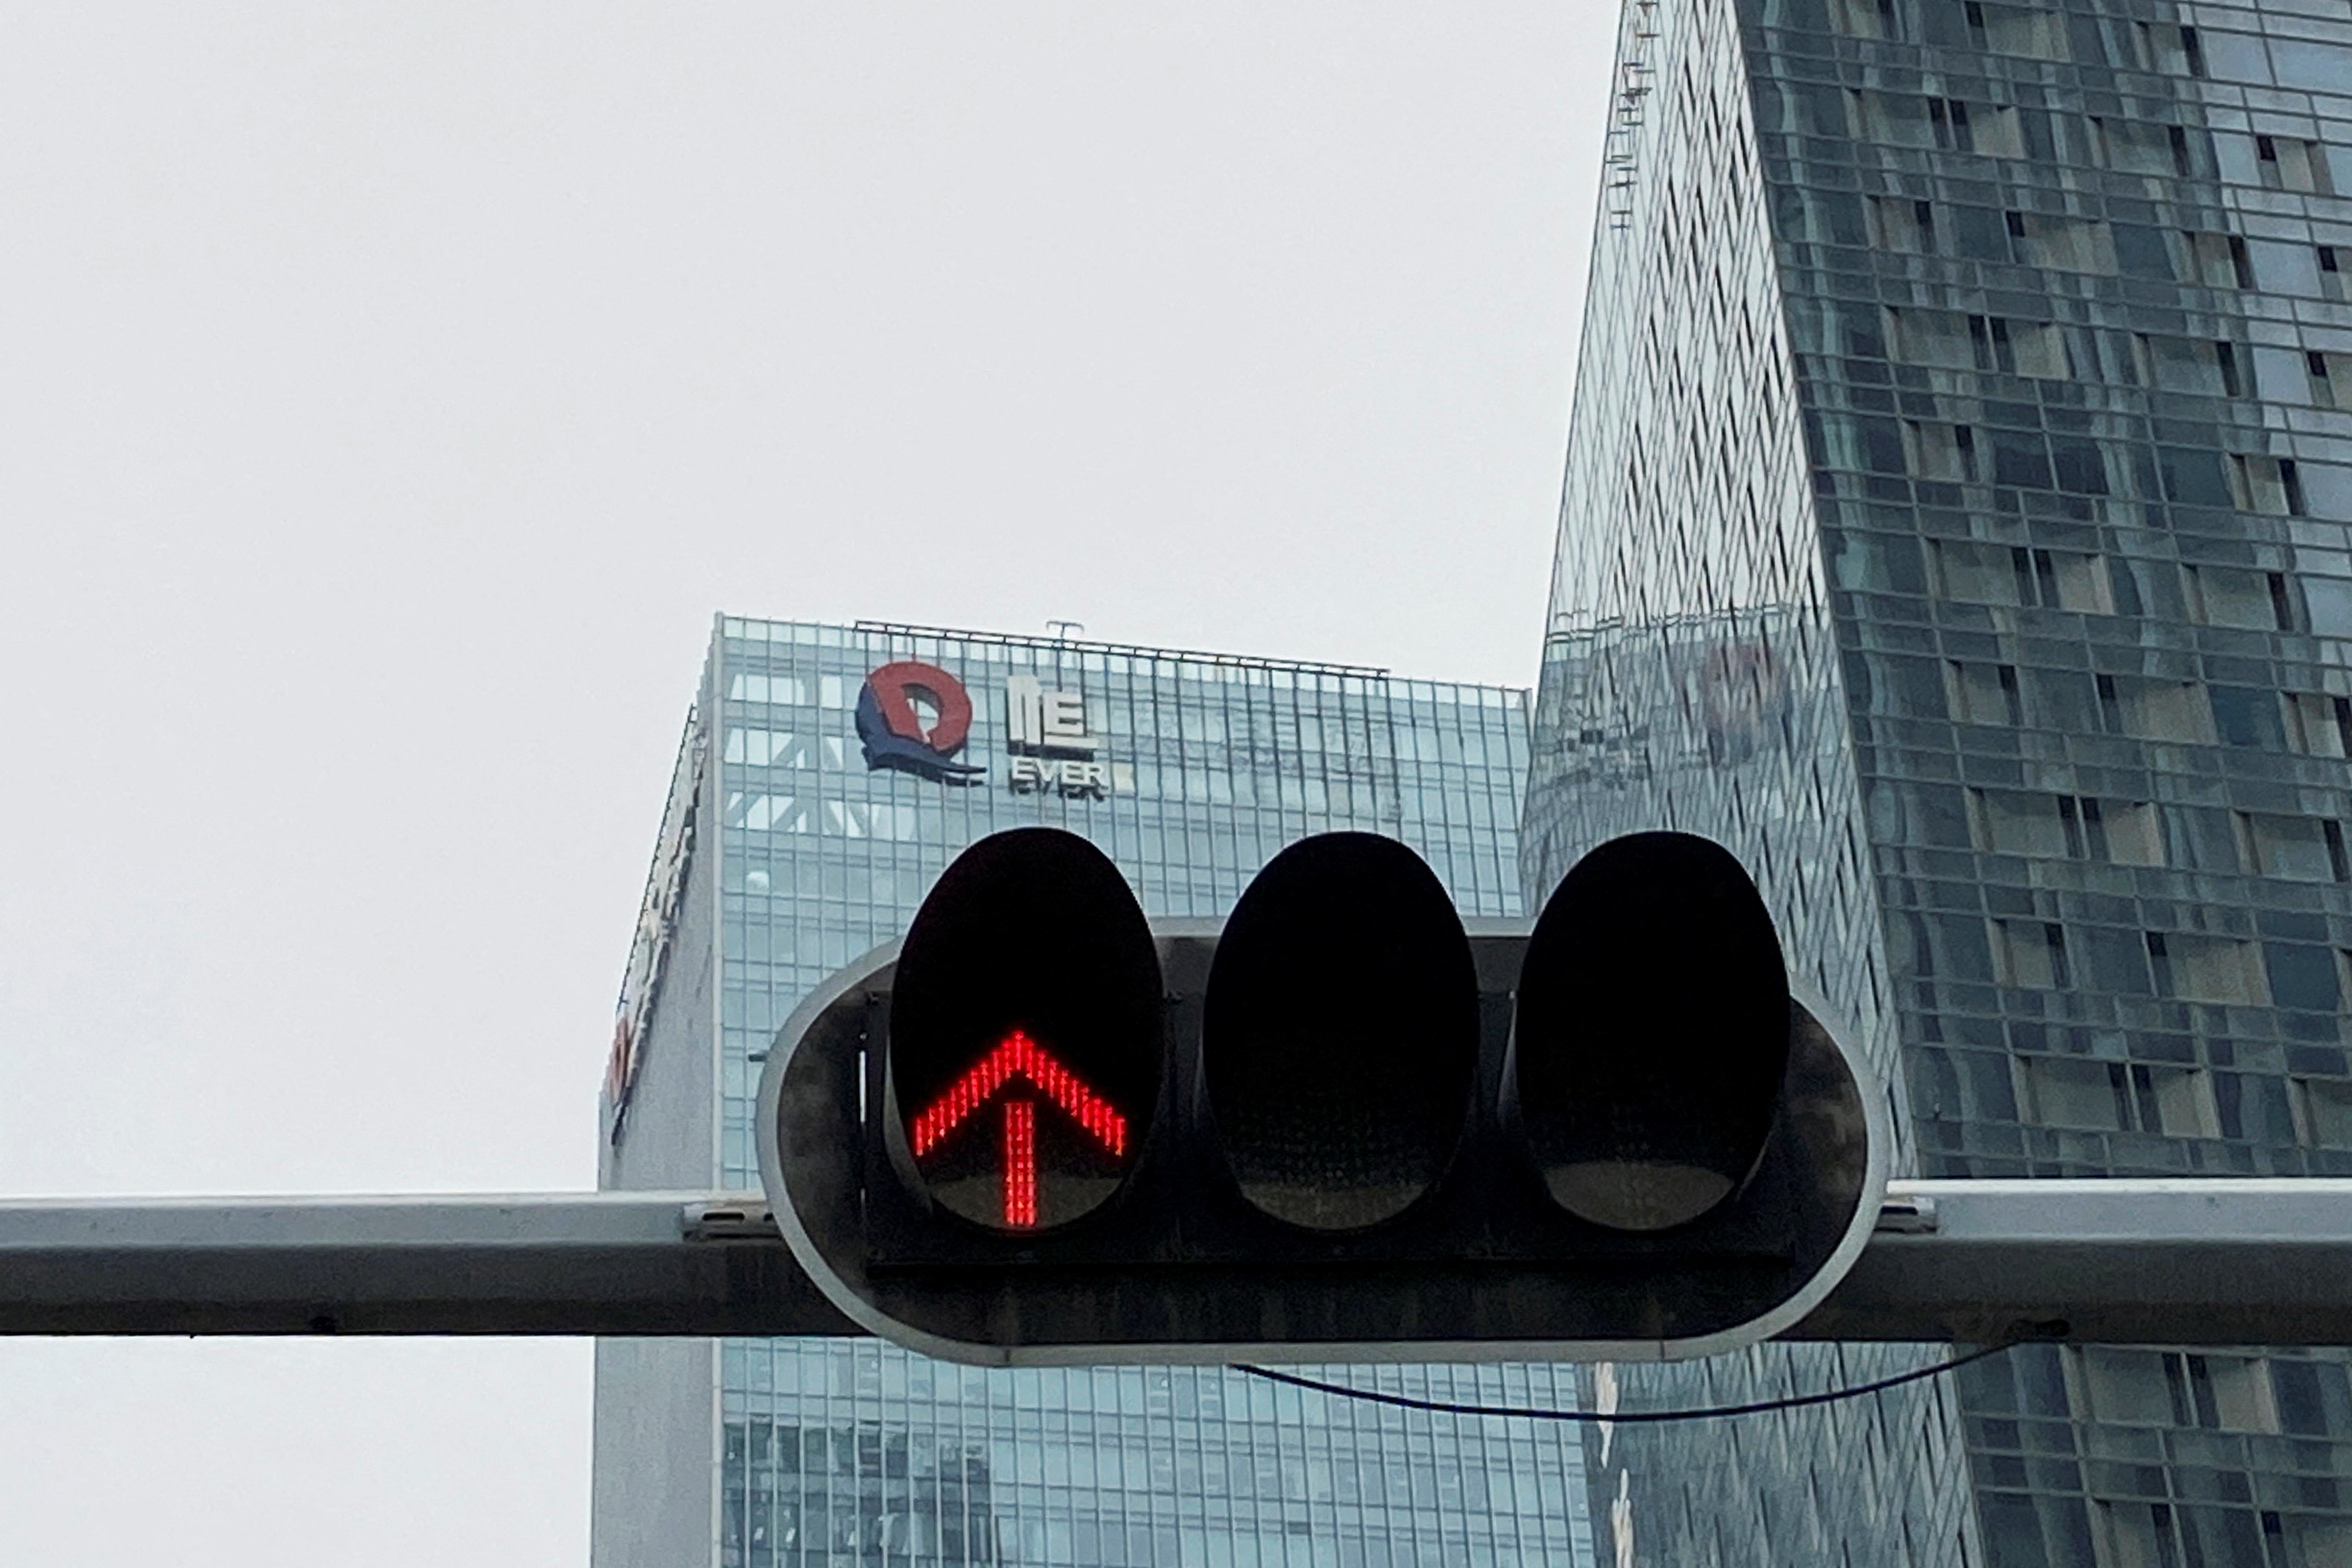 A partially removed company logo of China Evergrande Group is seen on the facade of its headquarters, near a traffic light in Shenzhen, Guangdong province, China January 10, 2022. REUTERS/David Kirton